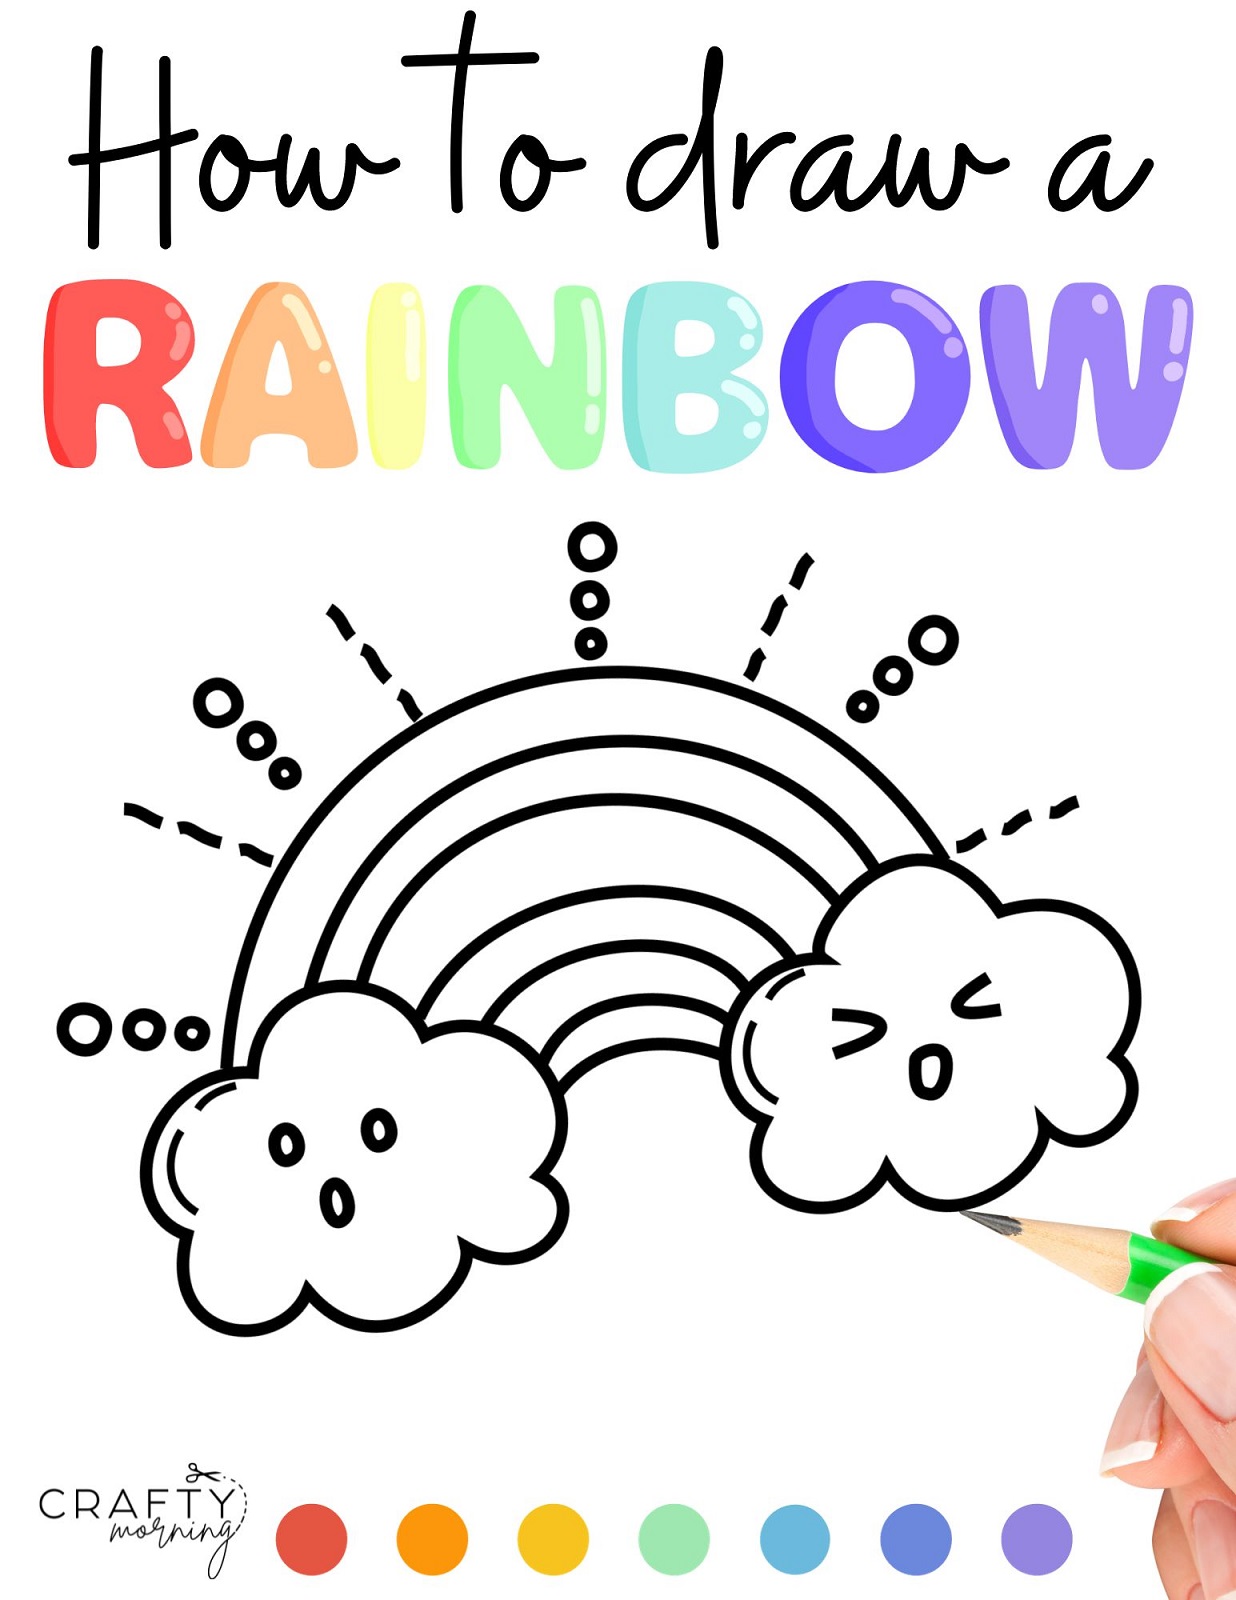 How to Draw and Paint a Rainbow with Watercolors (Easy!) - Arty Crafty Kids